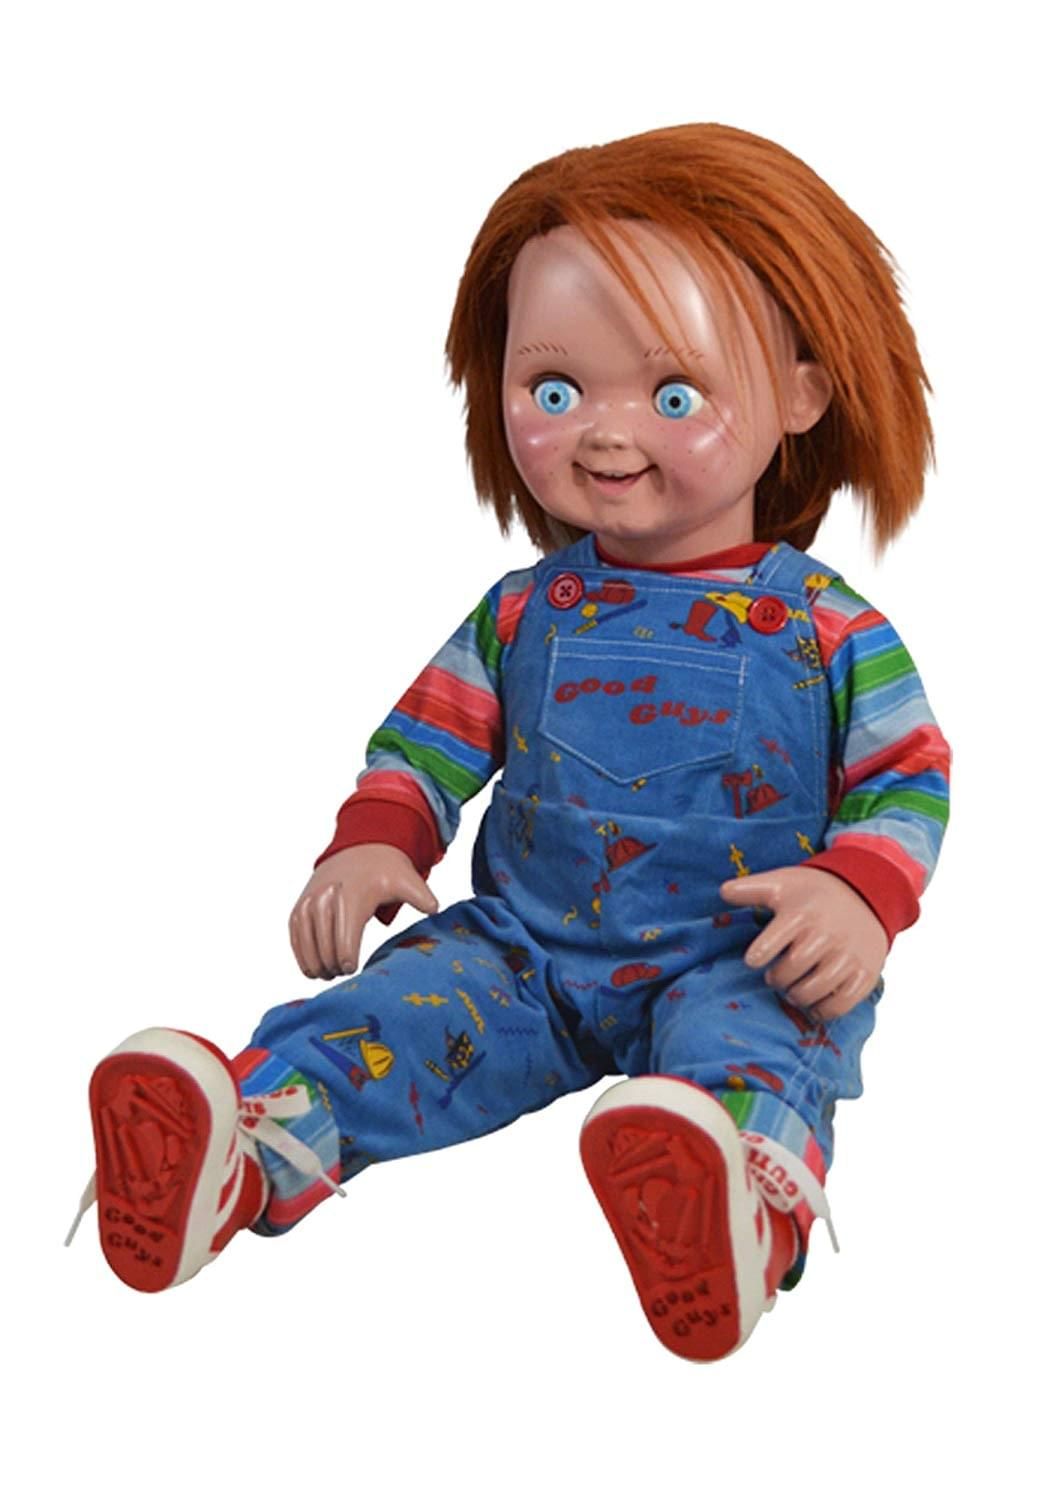 7884Syfy and USA Network’s upcoming TV series Chucky revealed.